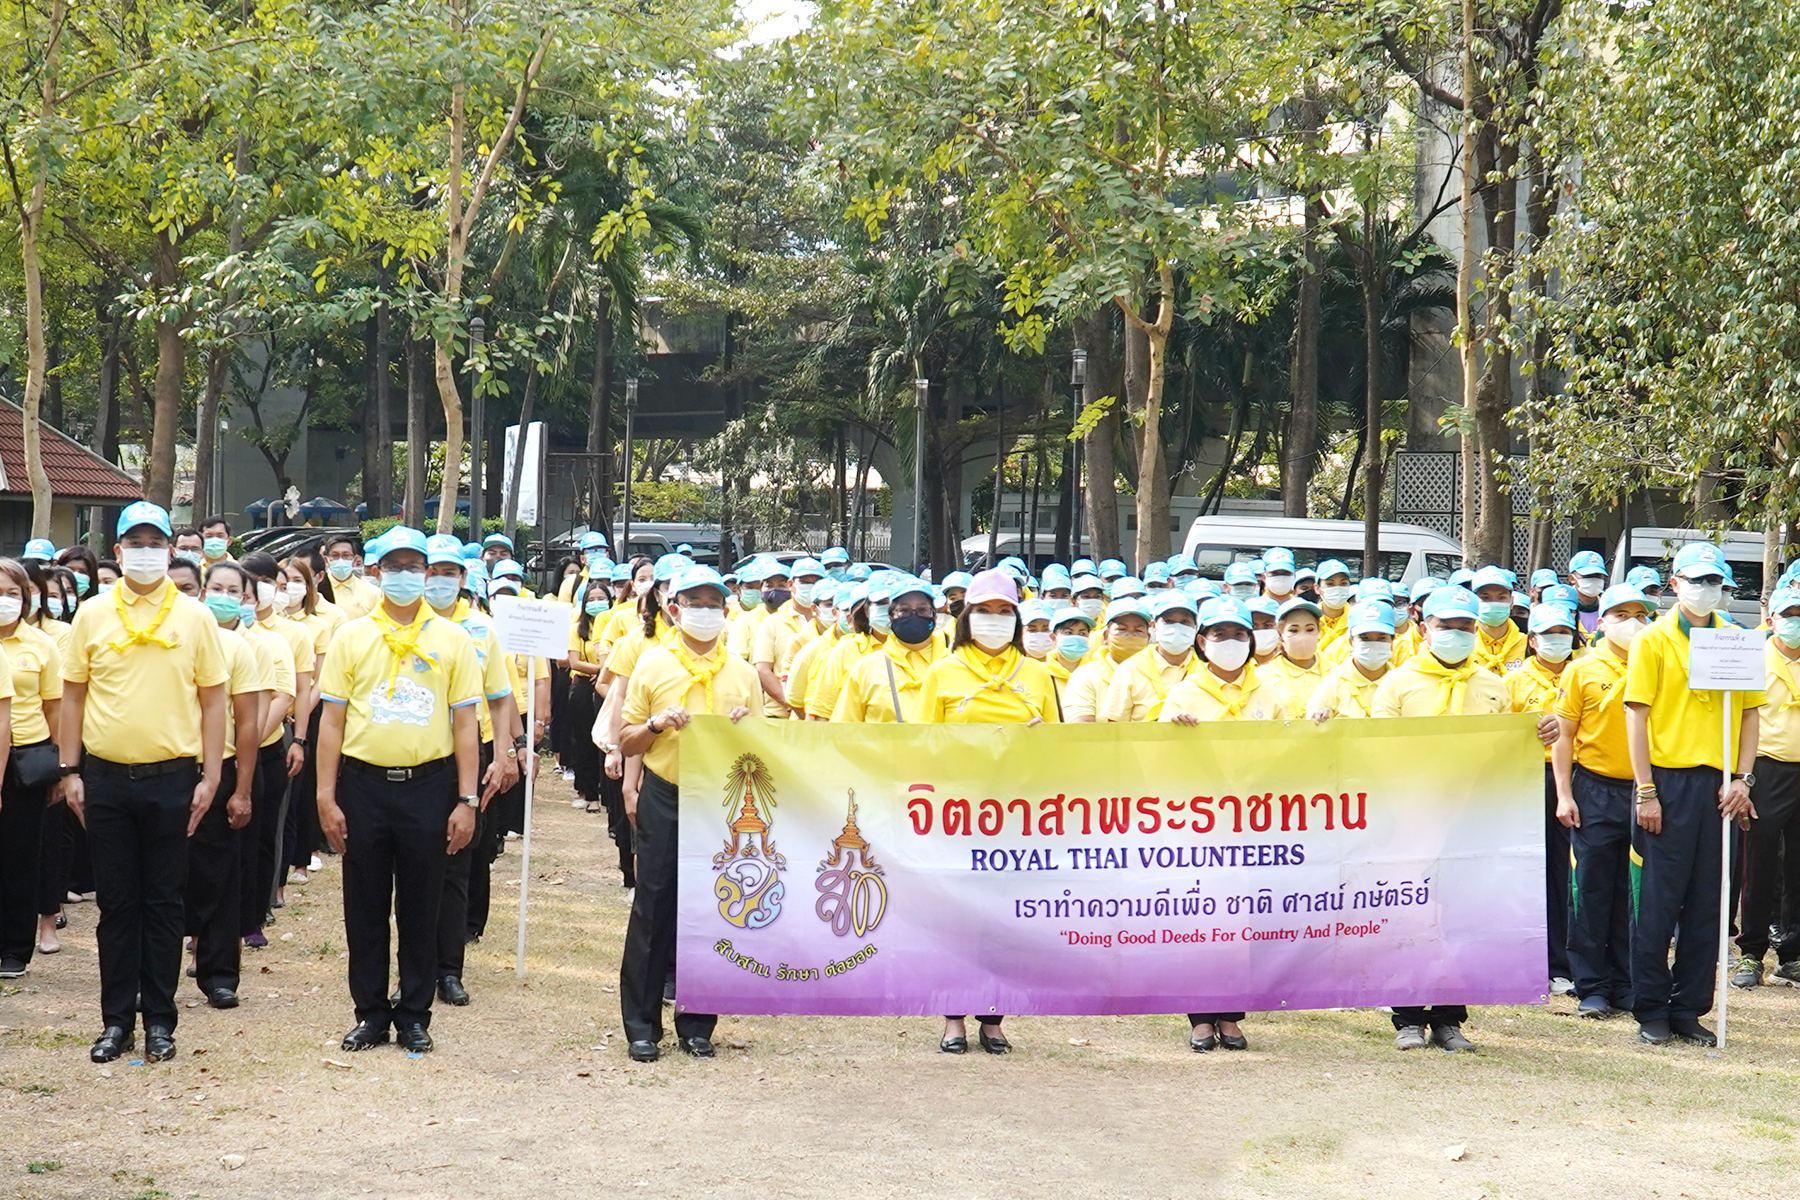 EXIM Thailand Joins Development Volunteering Activity Held by Phayathai District Office and Nearby Agencies on the Occasion of Birthday Anniversary of King Rama II